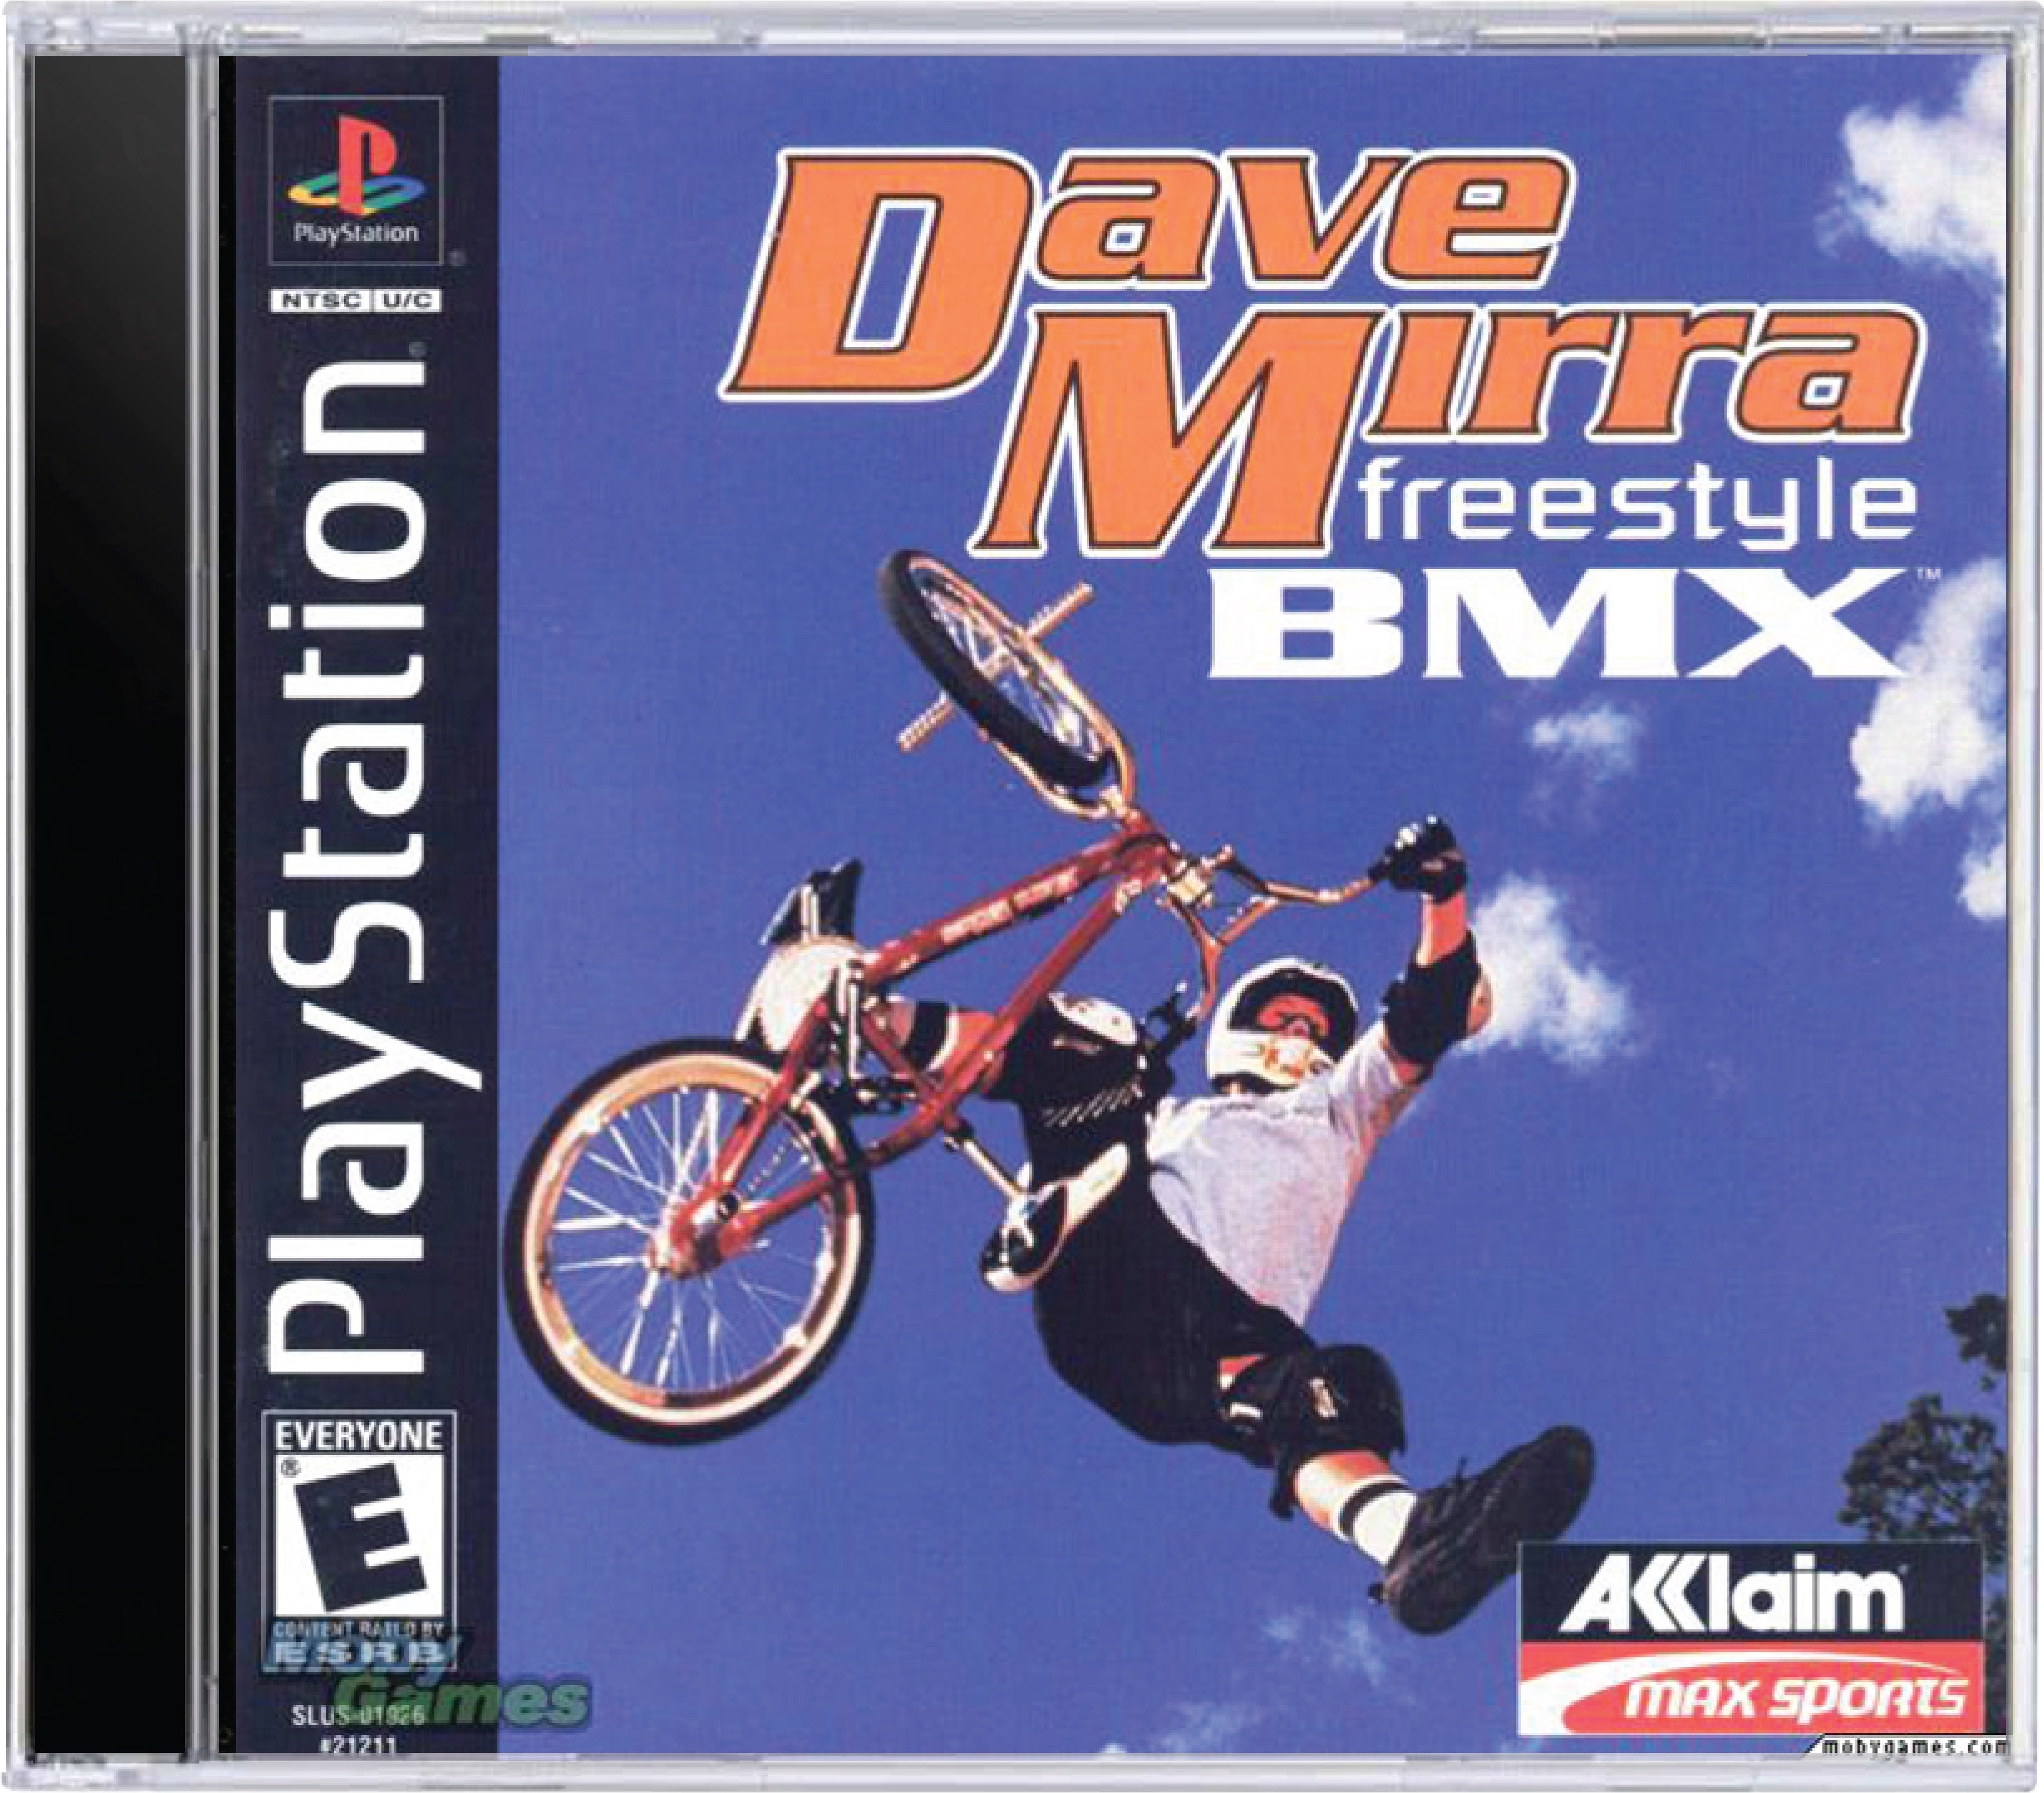 Dave Mirra Freestyle BMX Cover Art and Product Photo